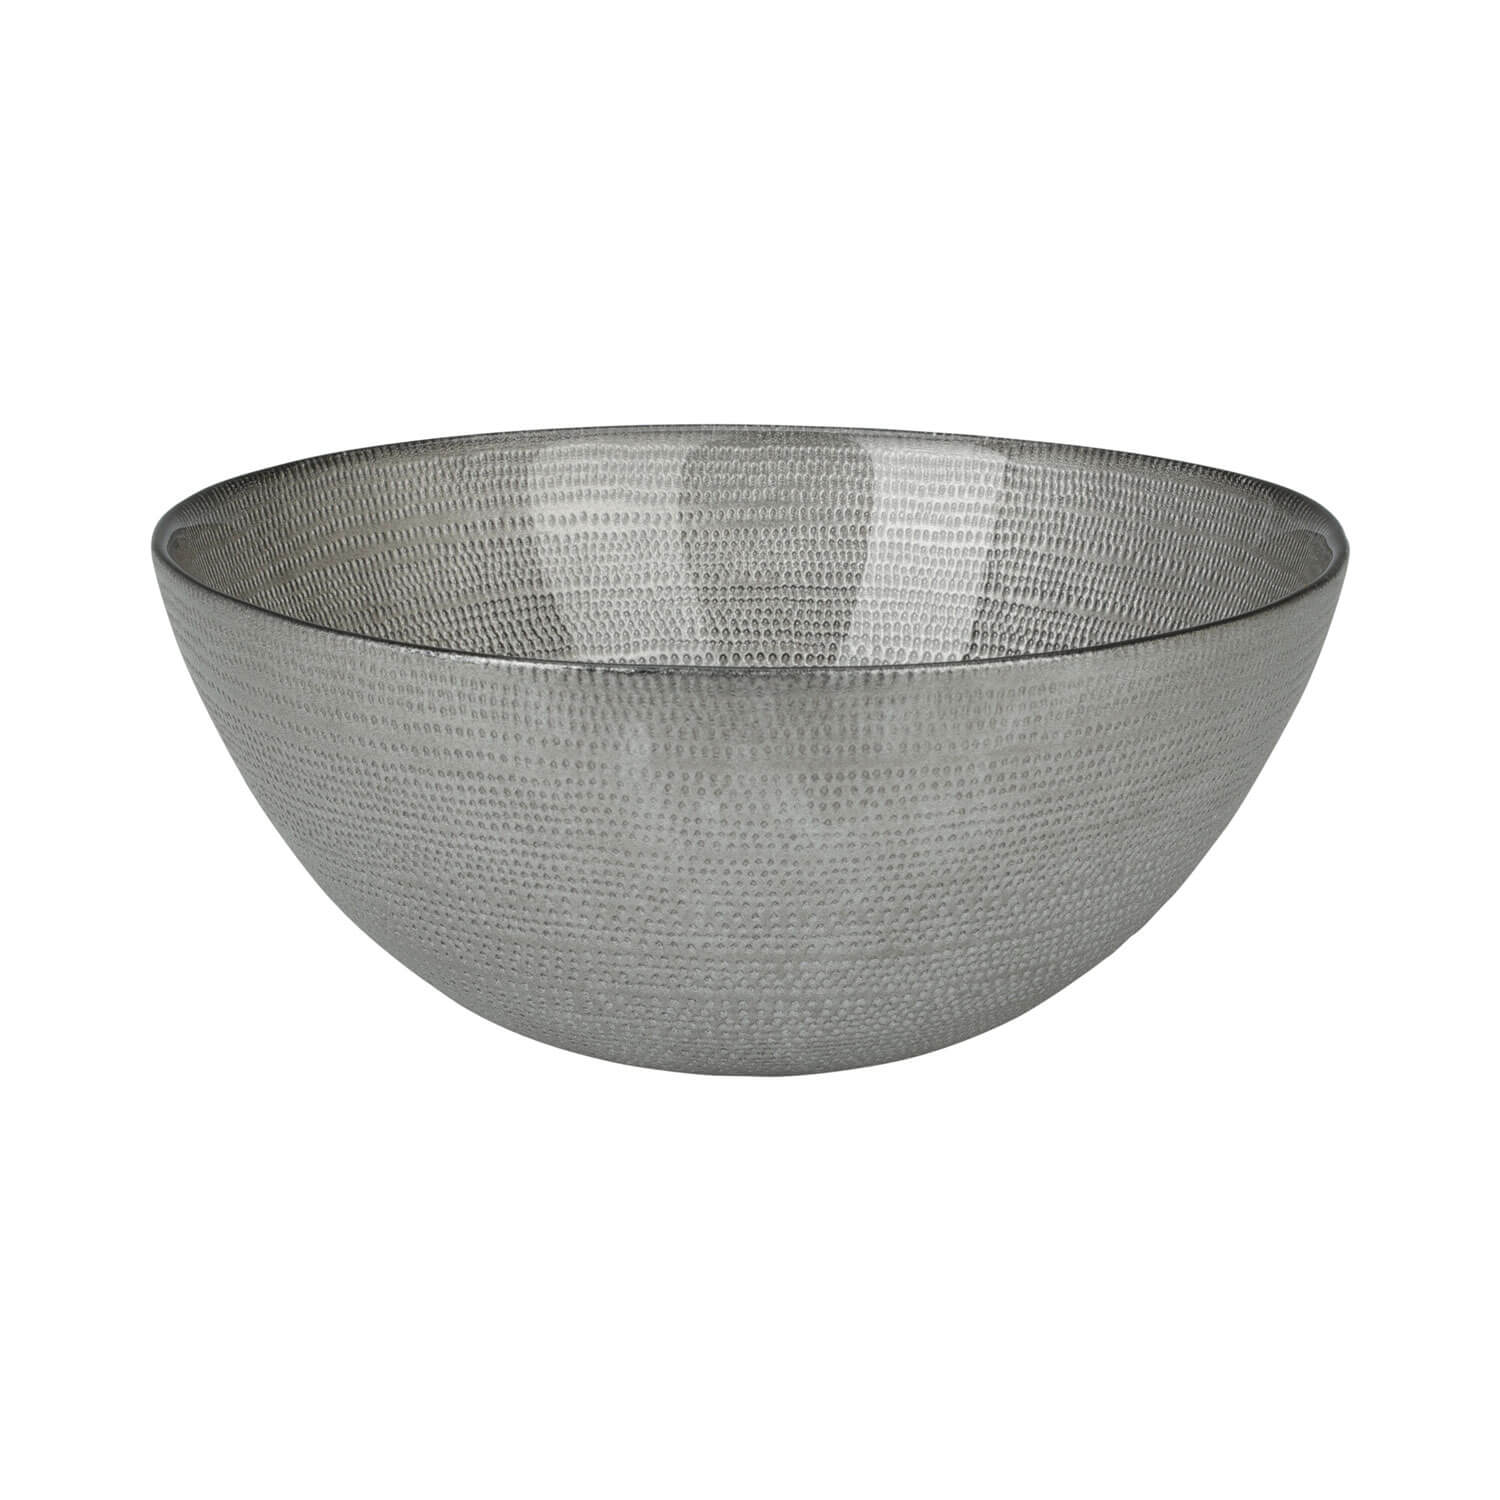 The Home Kitchen Glass Bowl - 21cm - Grey 1 Shaws Department Stores